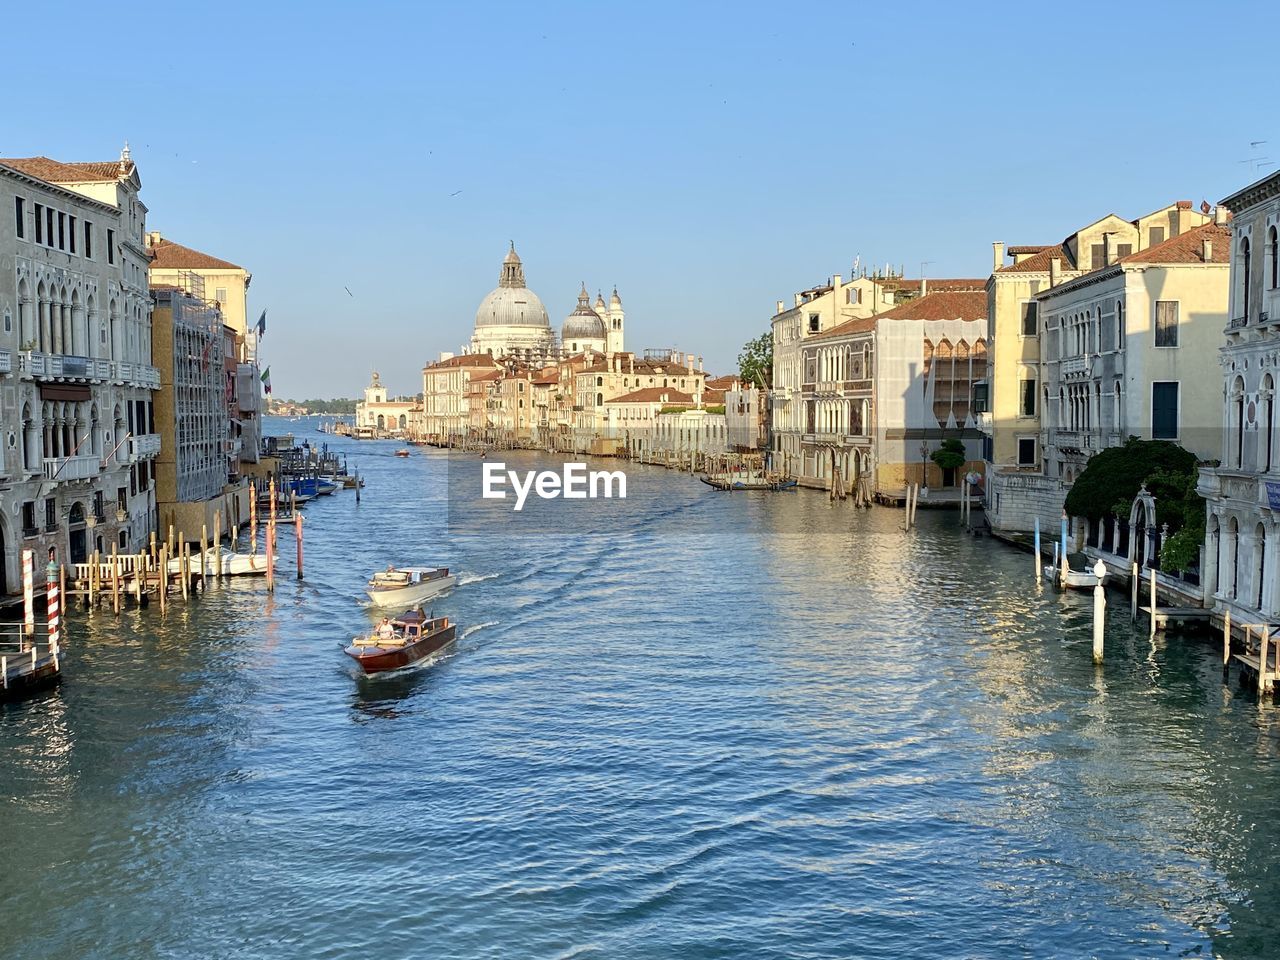 water, architecture, building exterior, nautical vessel, built structure, travel destinations, transportation, travel, mode of transportation, city, gondola, body of water, canal, nature, sky, tourism, waterway, boat, building, town, clear sky, vehicle, sea, waterfront, cityscape, channel, bridge, place of worship, gondolier, trip, vacation, day, history, blue, watercraft, holiday, craft, religion, outdoors, sunny, the past, harbor, old, no people, sunlight, bell tower, ship, reflection, residential district